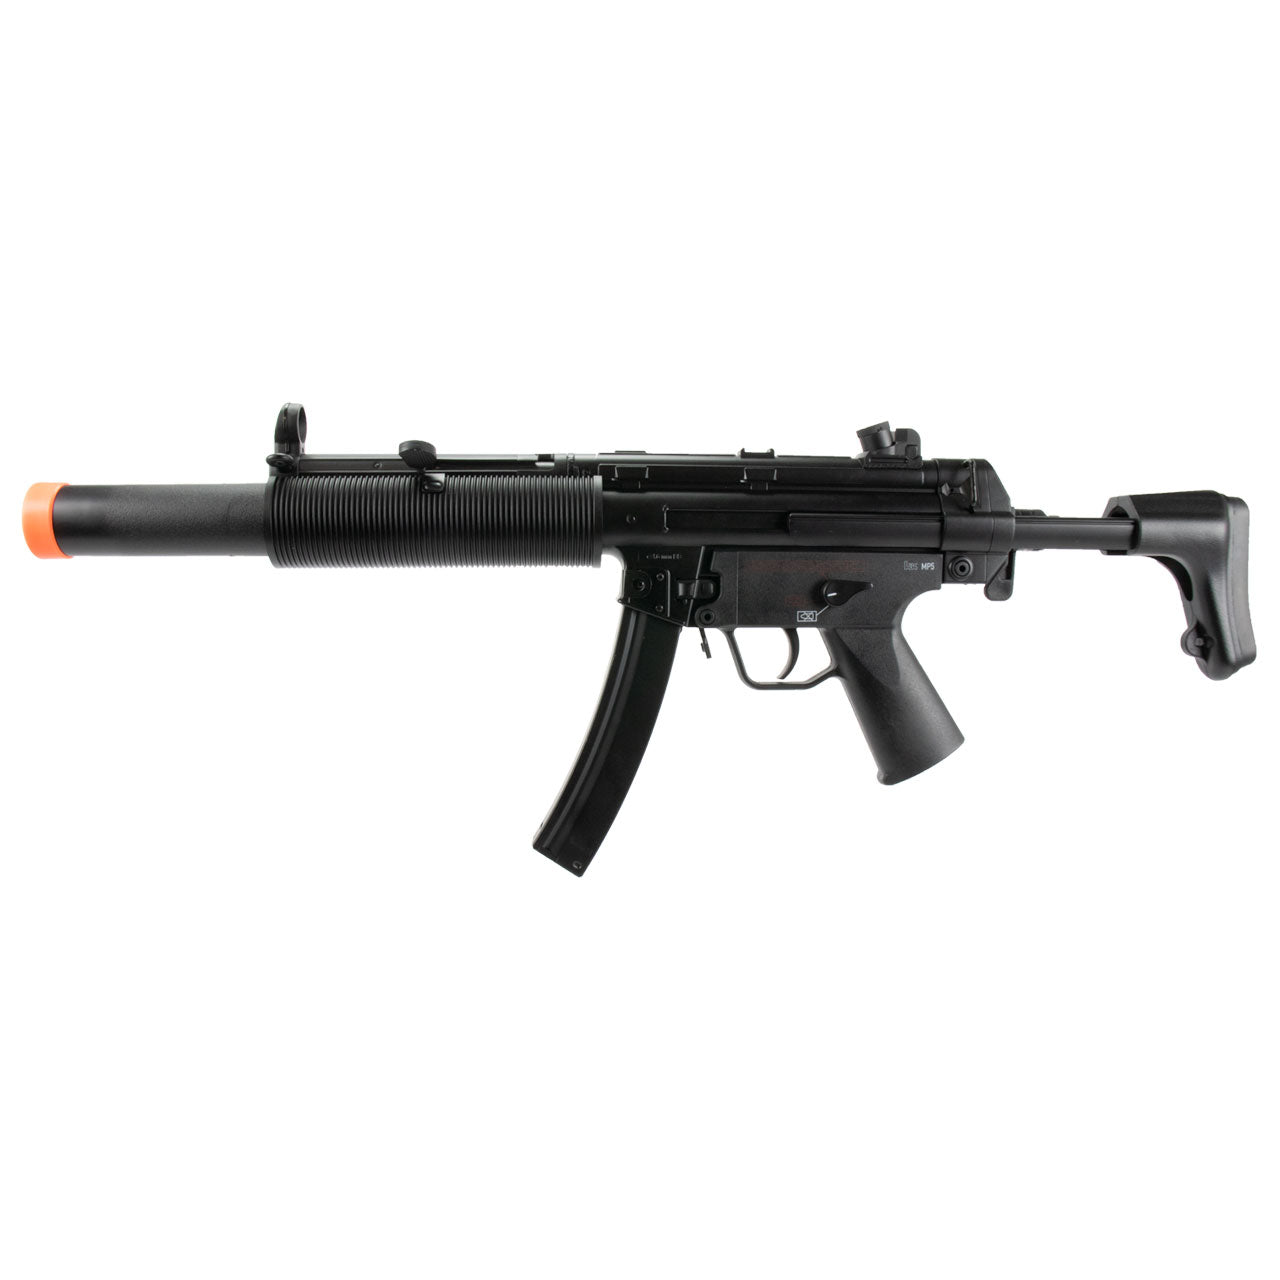 H&K Competition MP5 SD6 SMG AEG Airsoft AEG by Umarex